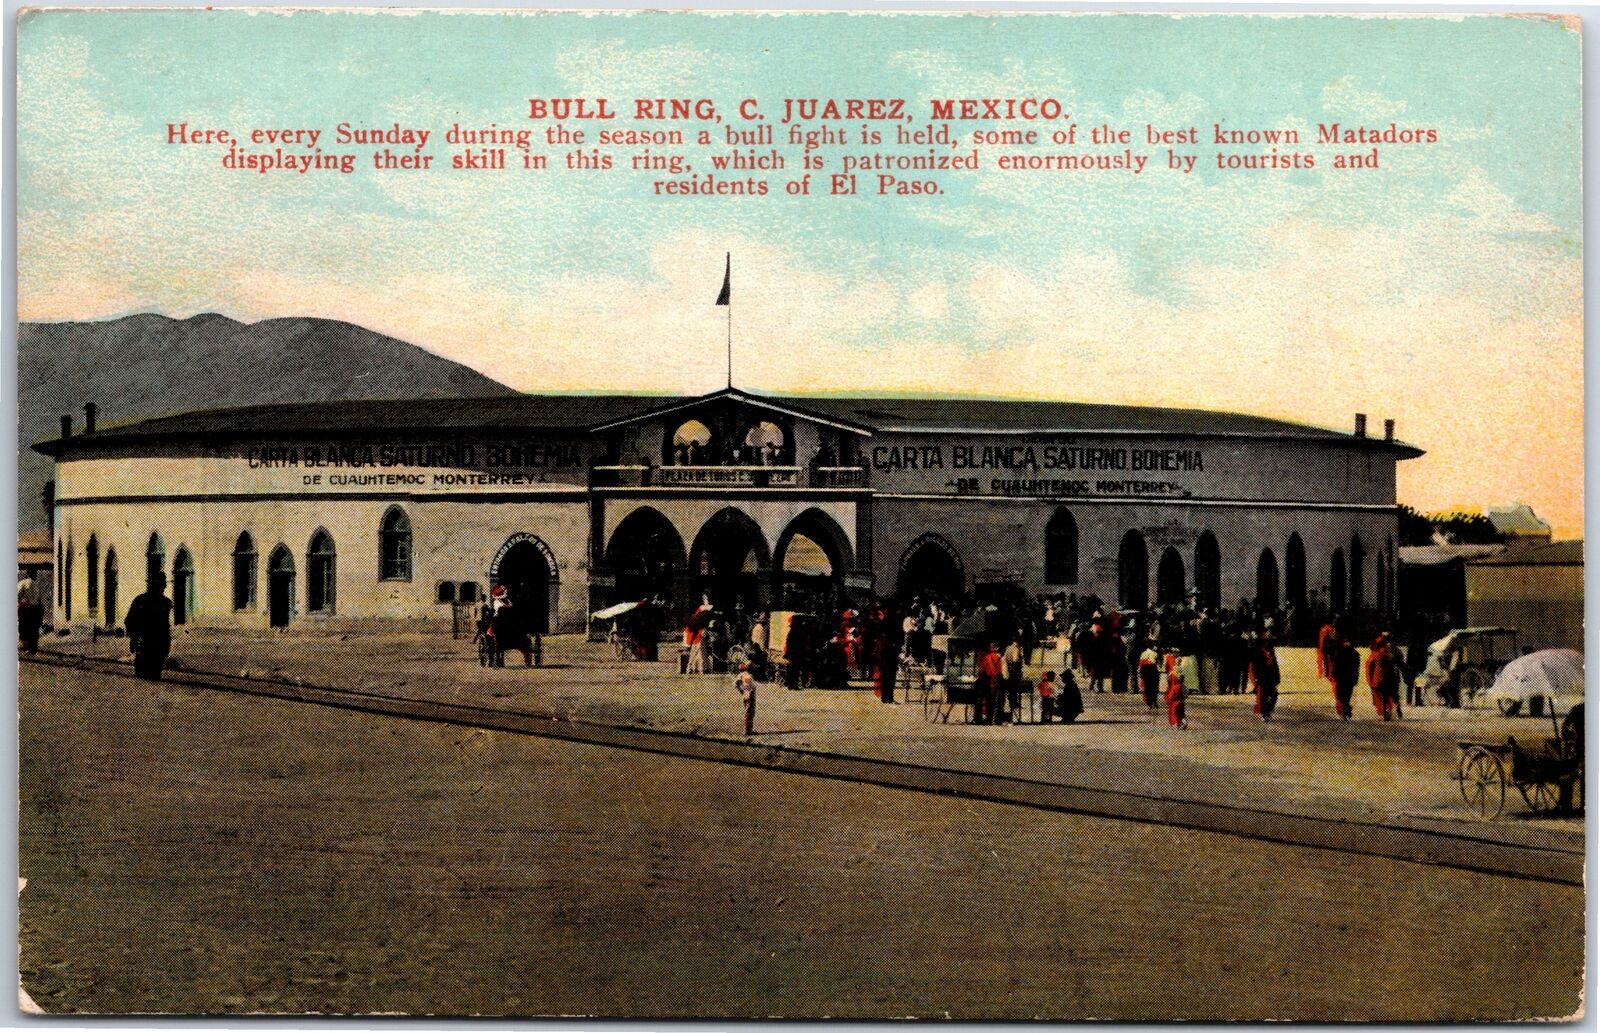 VINTAGE POSTCARD THE BULL RING BULLFIGHTING CROWDS C. JUAREZ MEXICO POSTED 1912